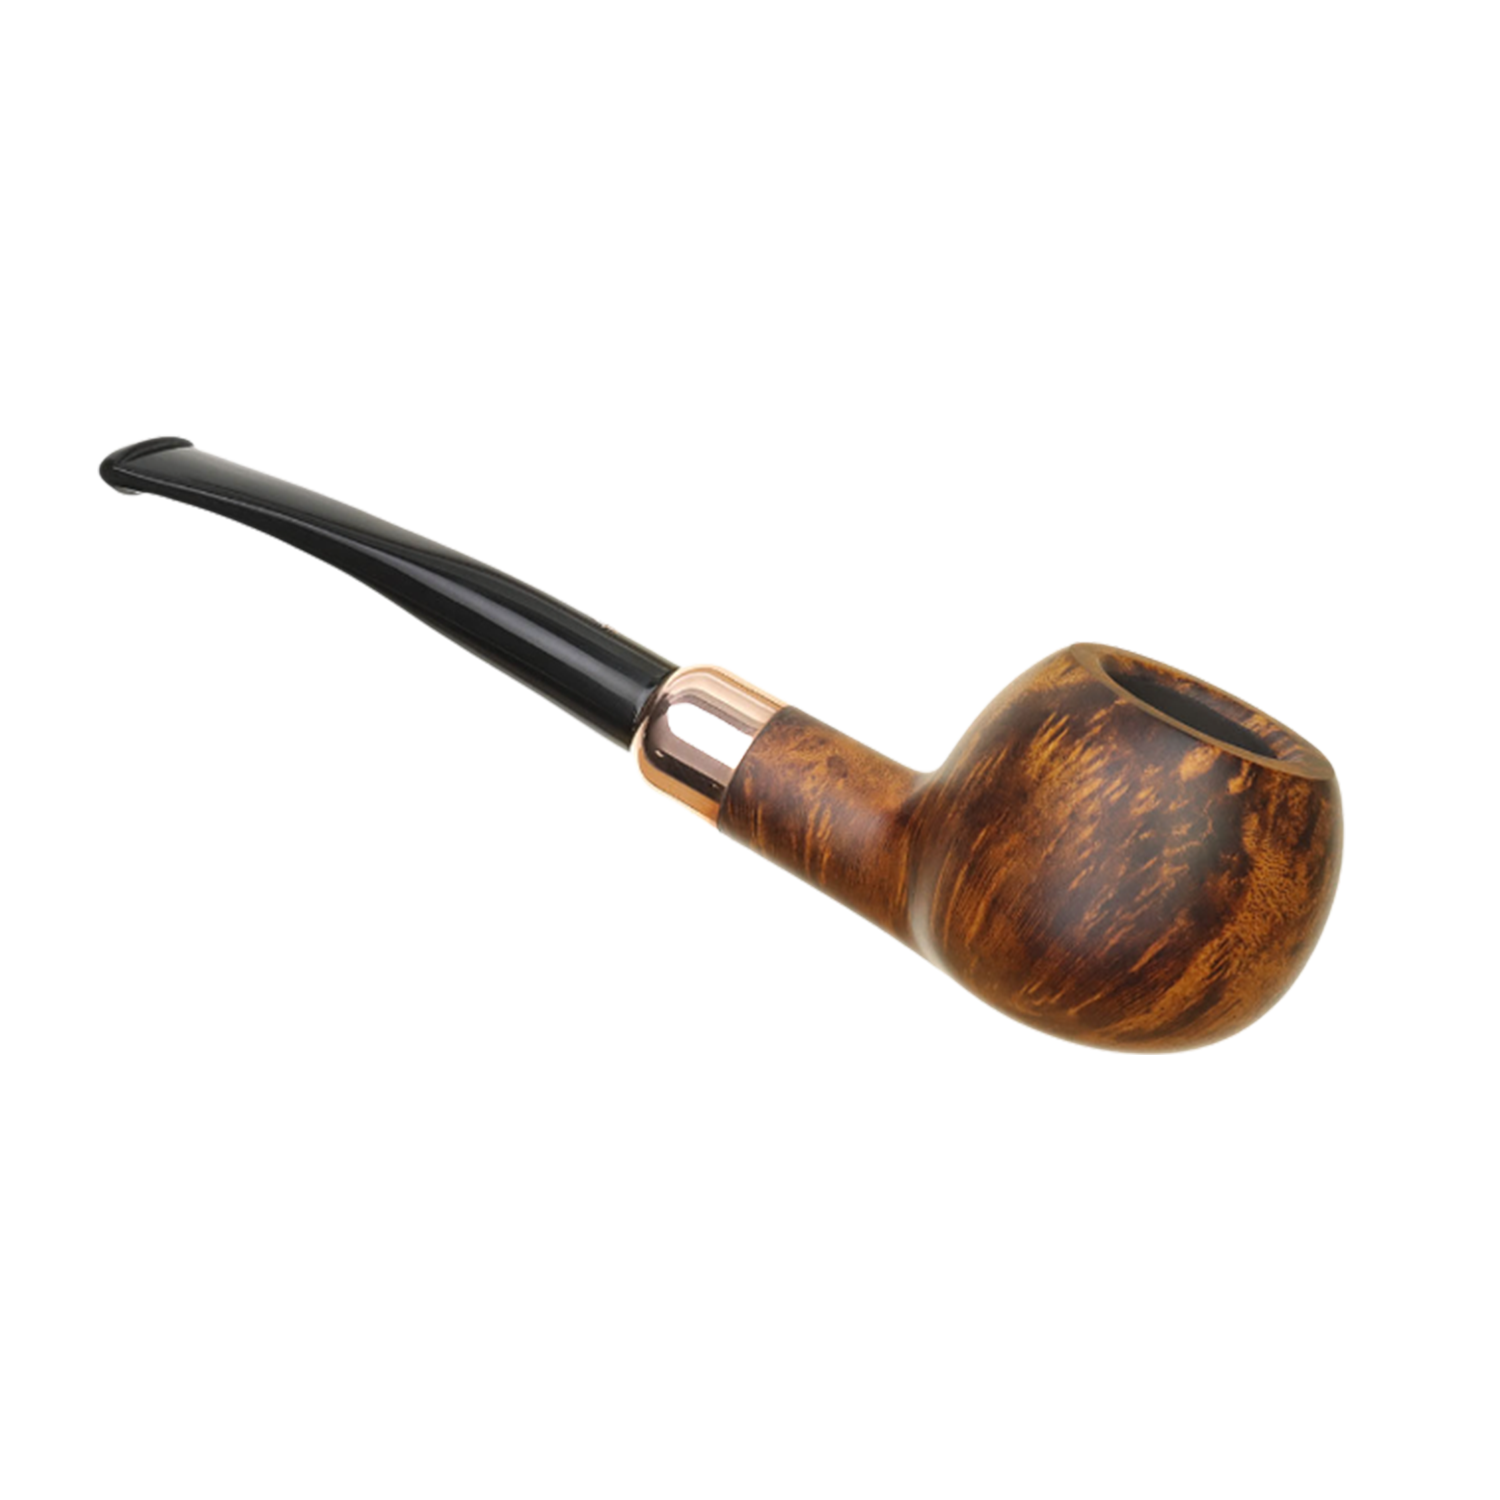 4th Generation Klassisk Smooth #406 Pipe